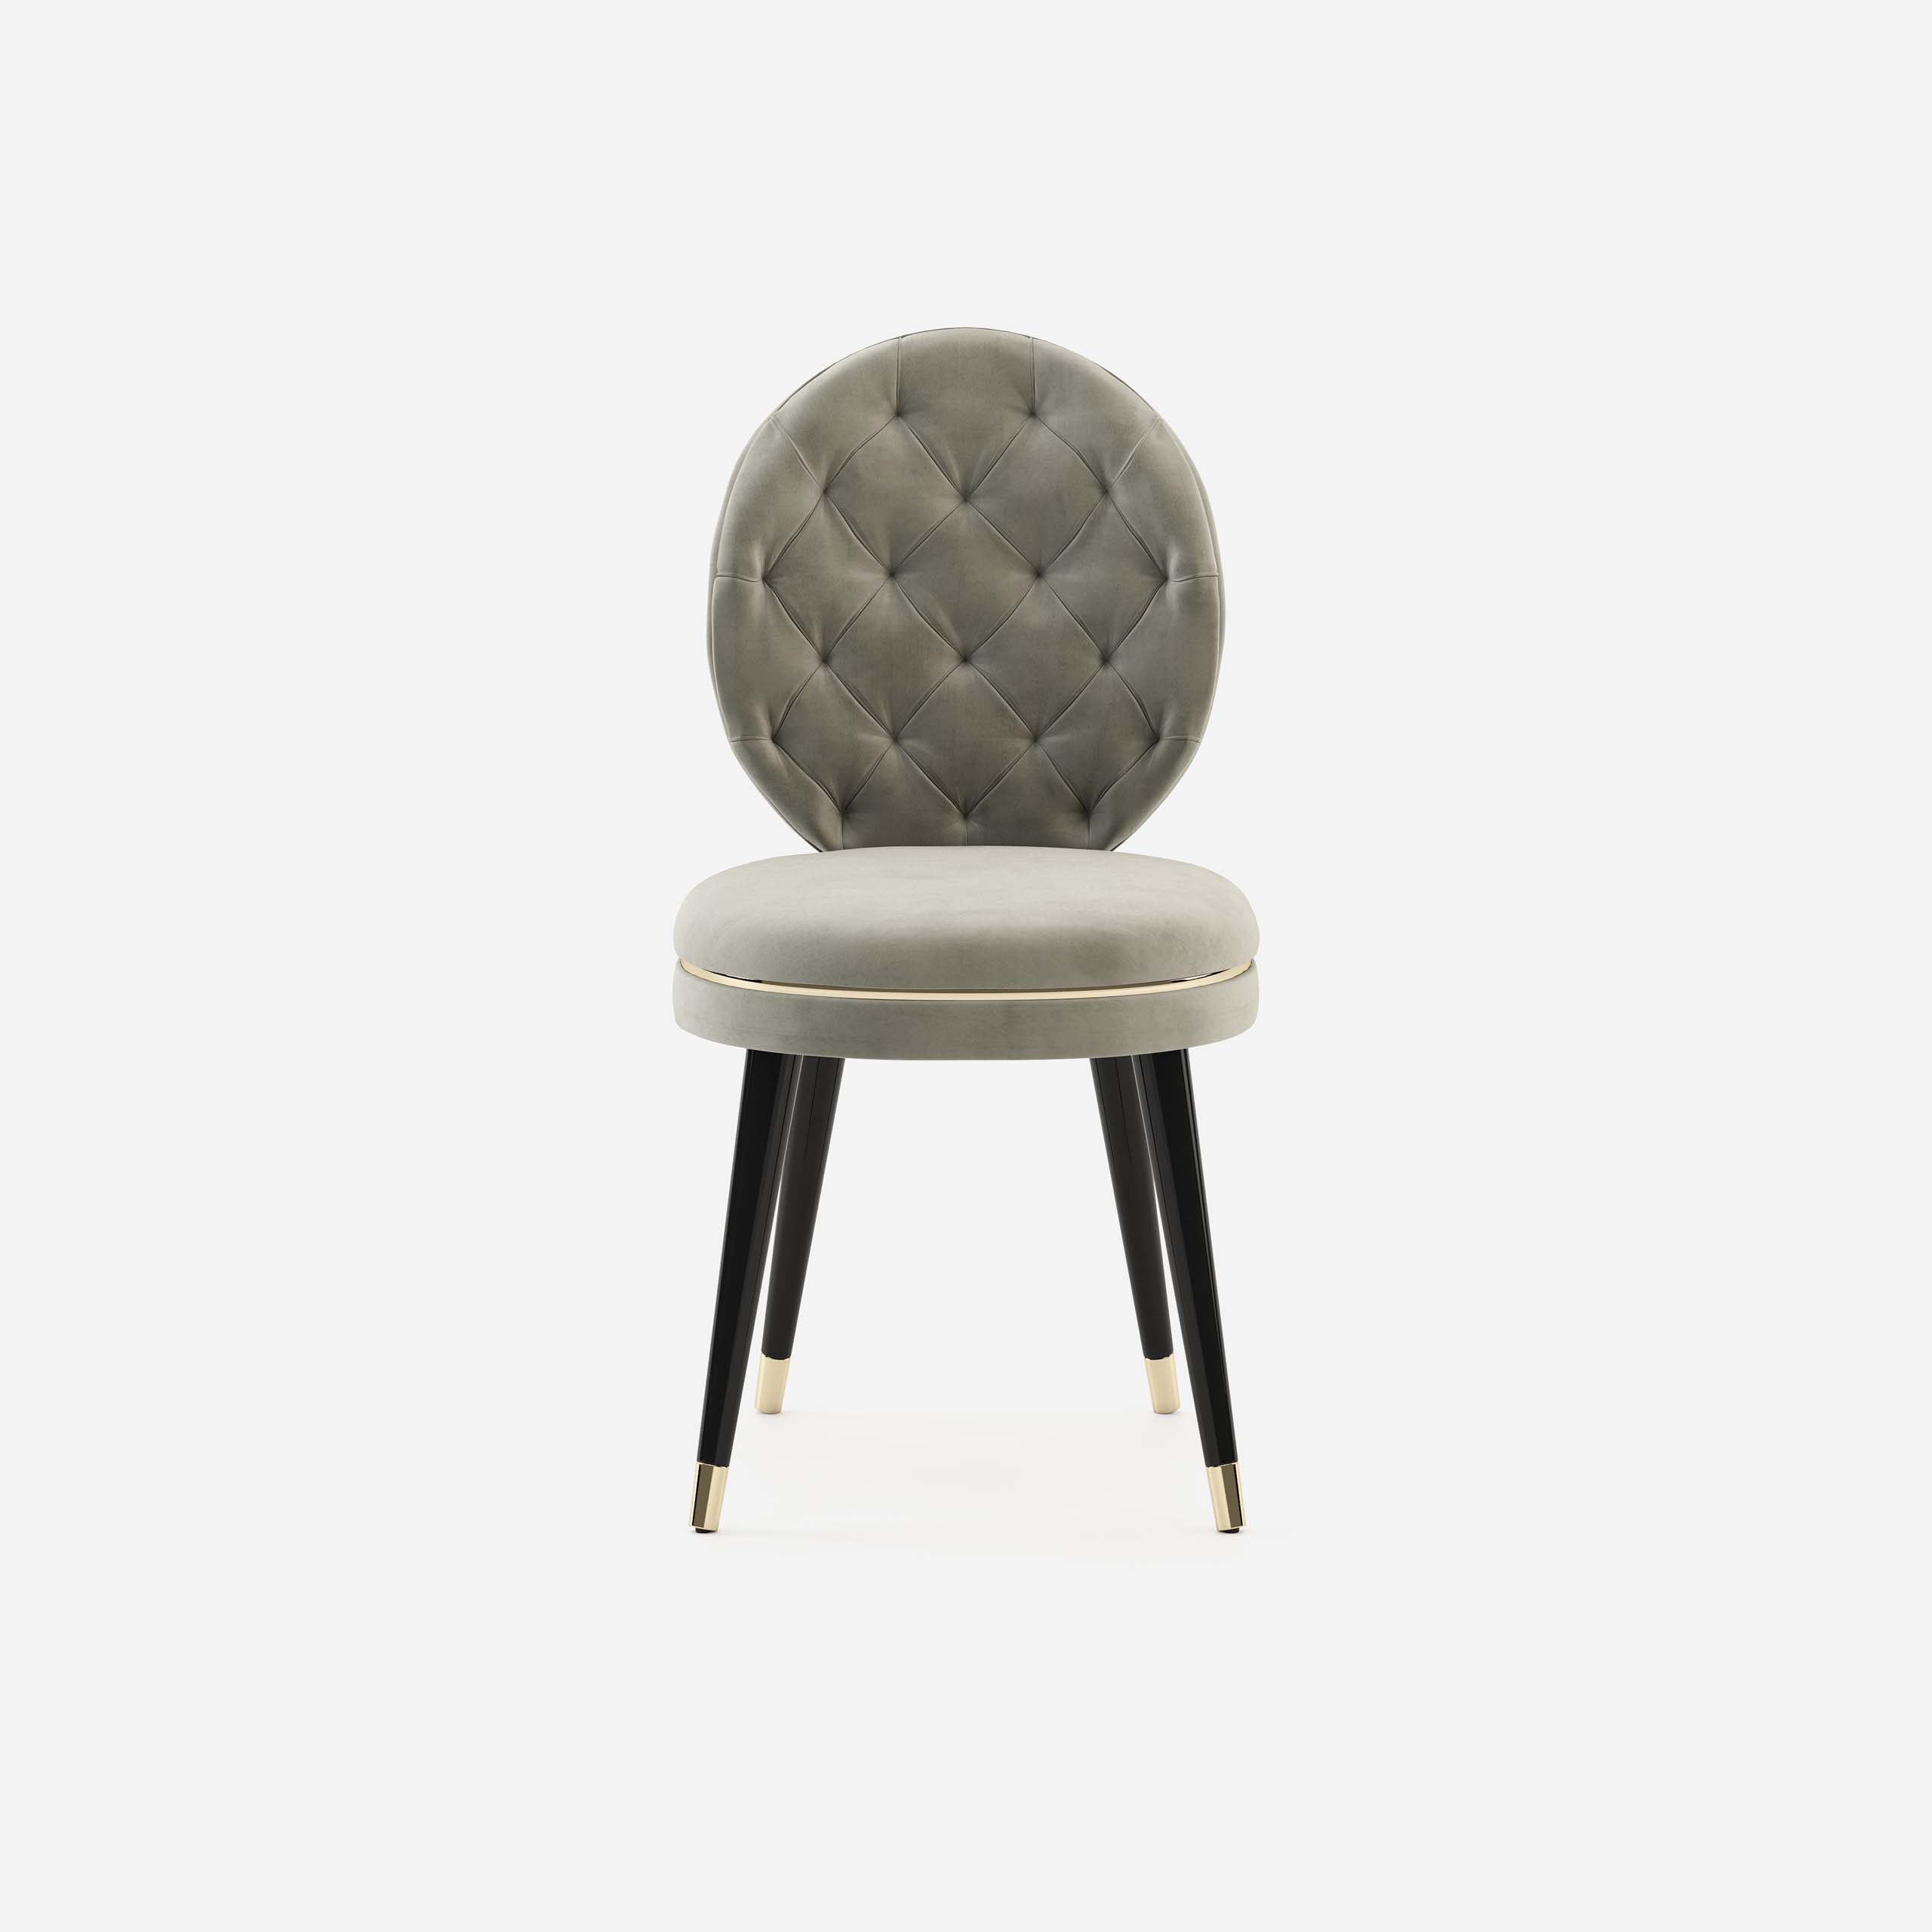 katy-chair-domkapa-new-collection-2021-dining-room-decor-1